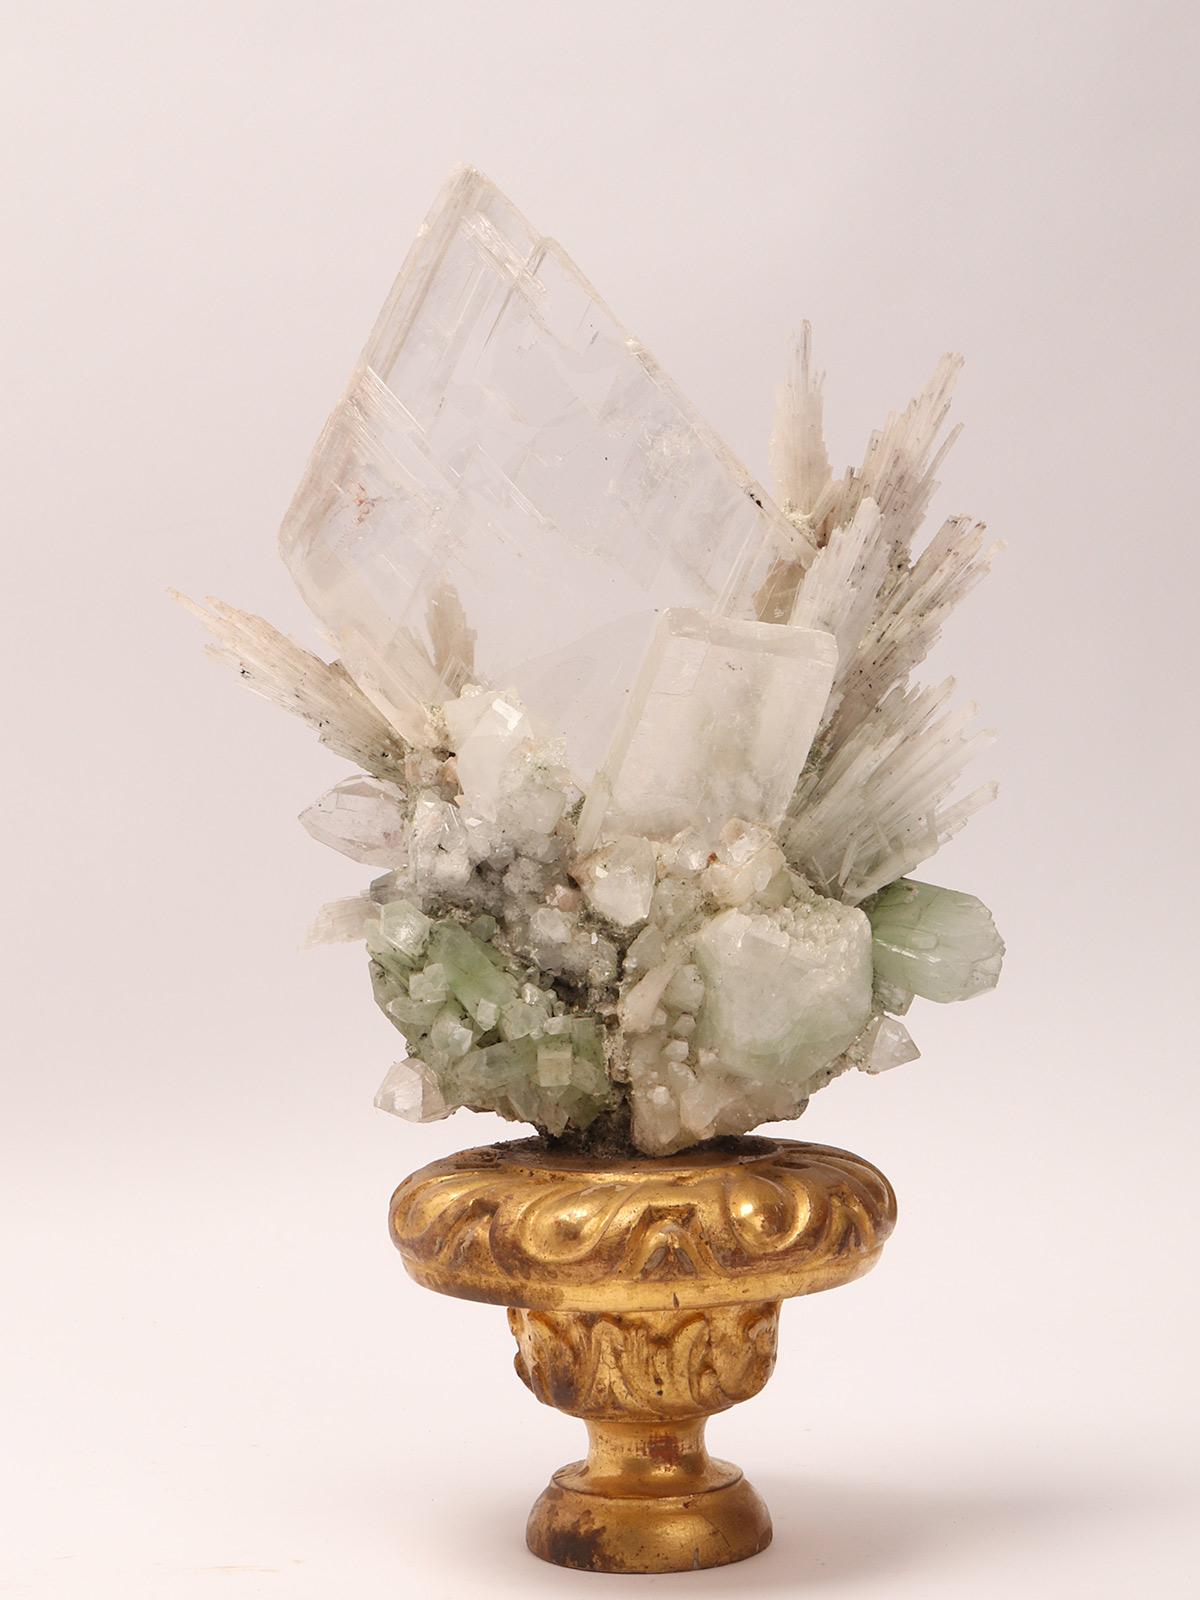 A Naturalia mineral specimen. A druse of apophilite, quartz, colacite and calcite flowers crystals, mounted over a guild-plated wooden base on a vase shape. Italy 1880 ca.